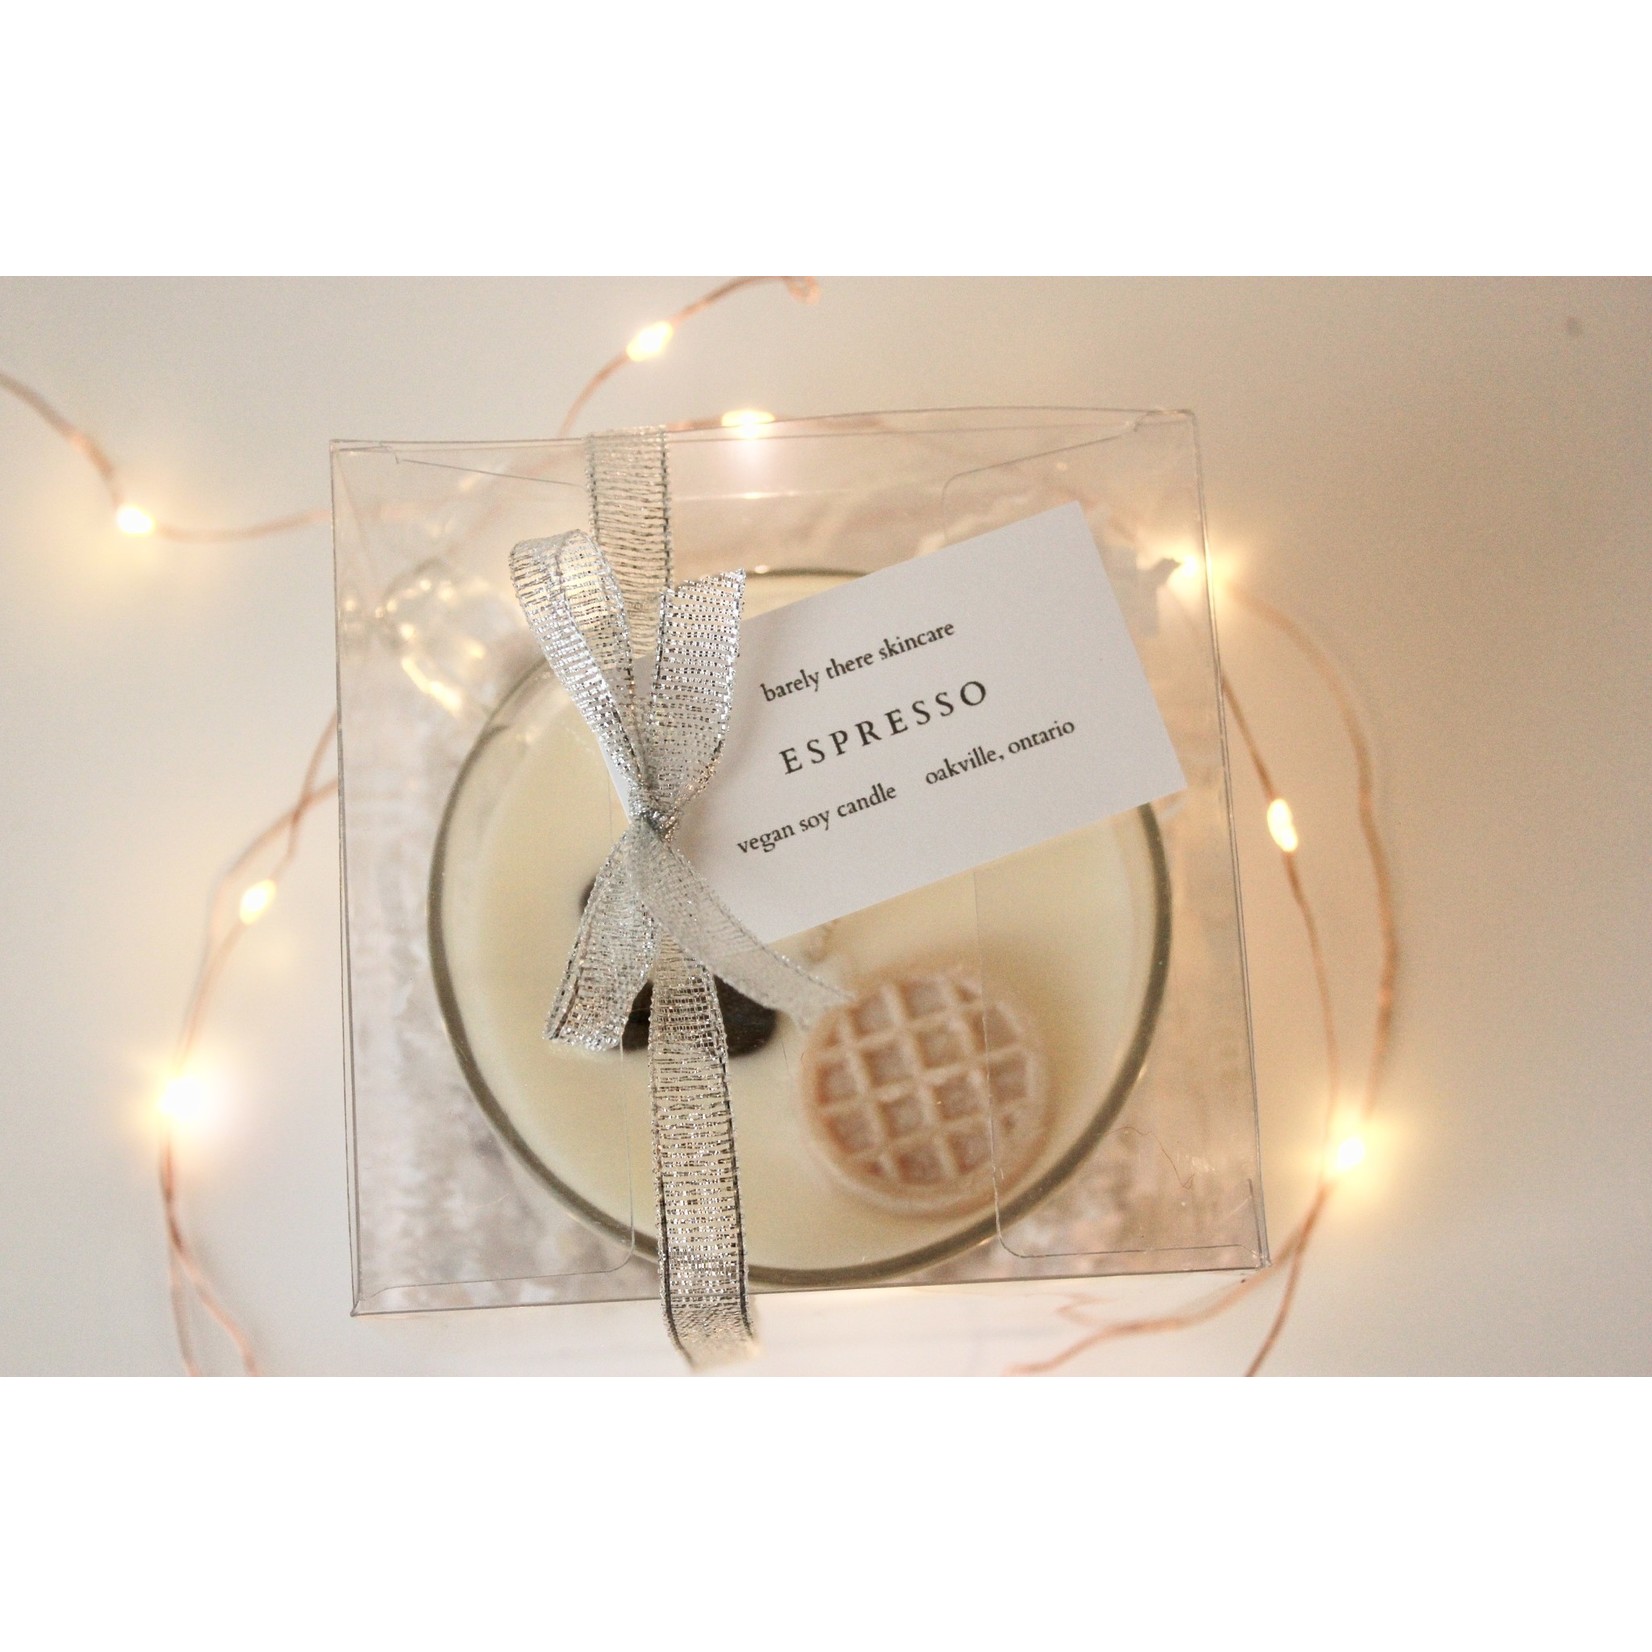 BARELY THERE SKINCARE BARELY THERE ESPRESSO MUG  SOY CANDLE